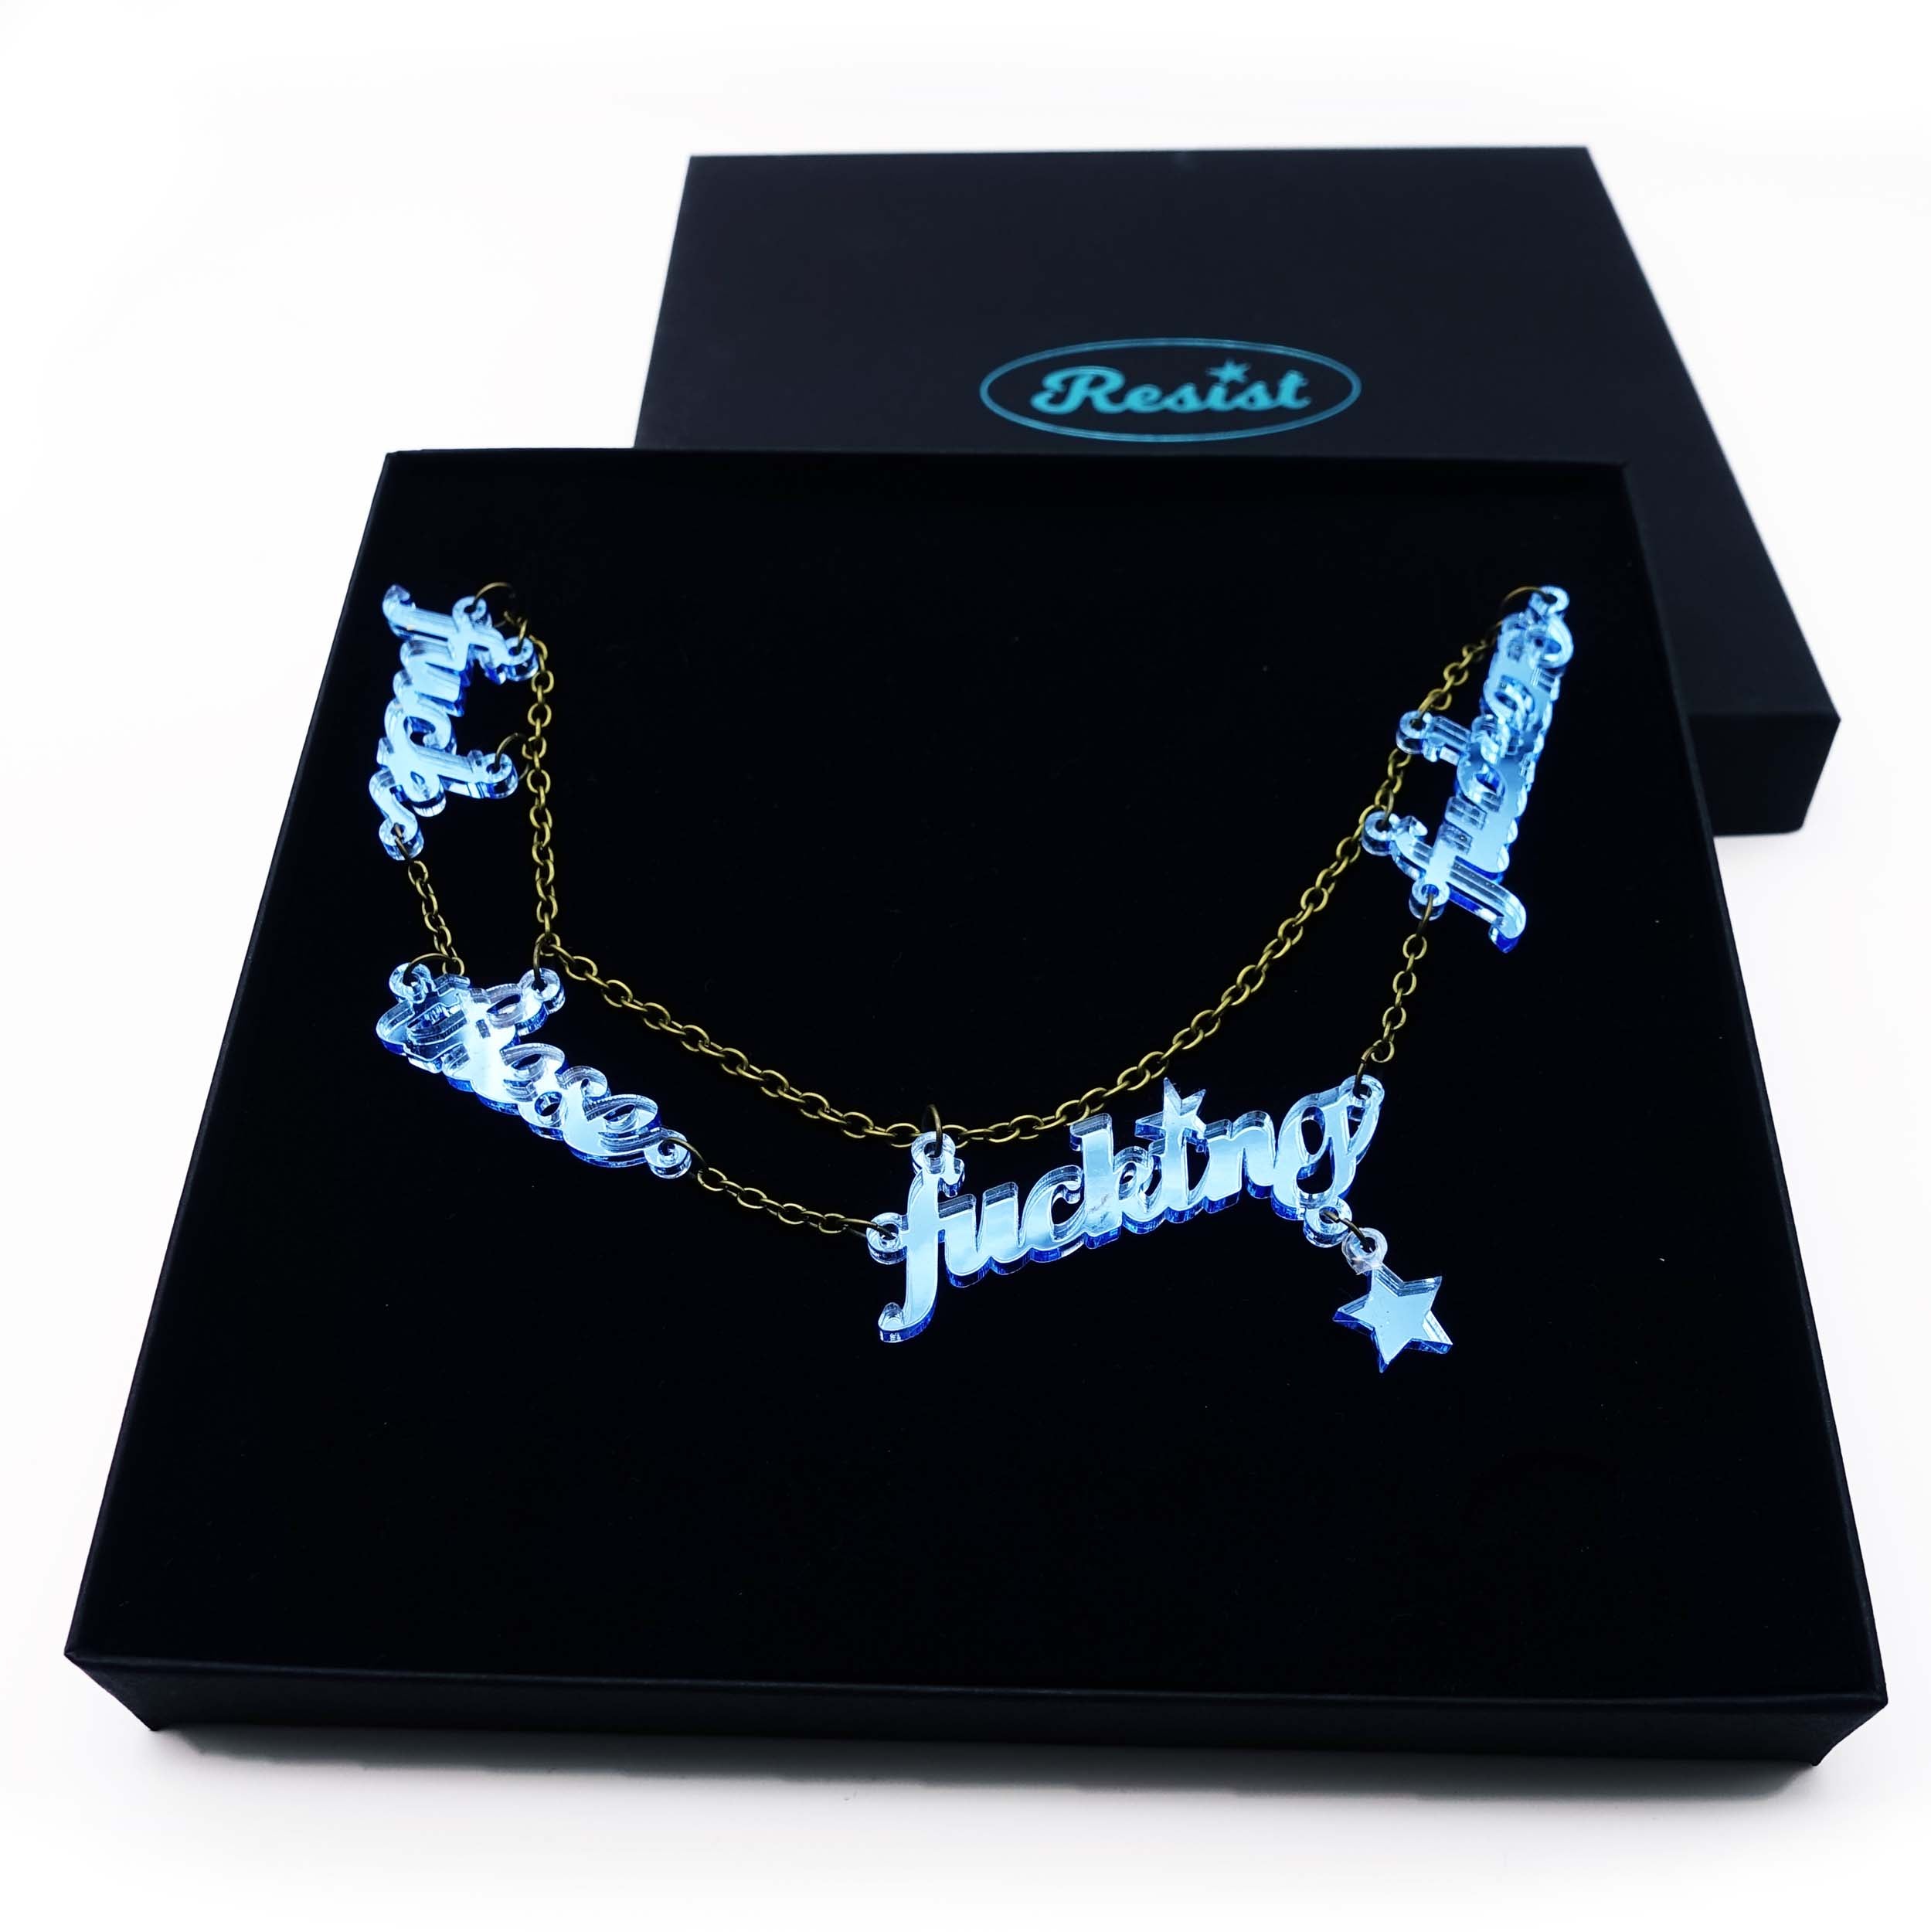 Sky mirror fuck these fucking fuckers necklace shown in large gift box